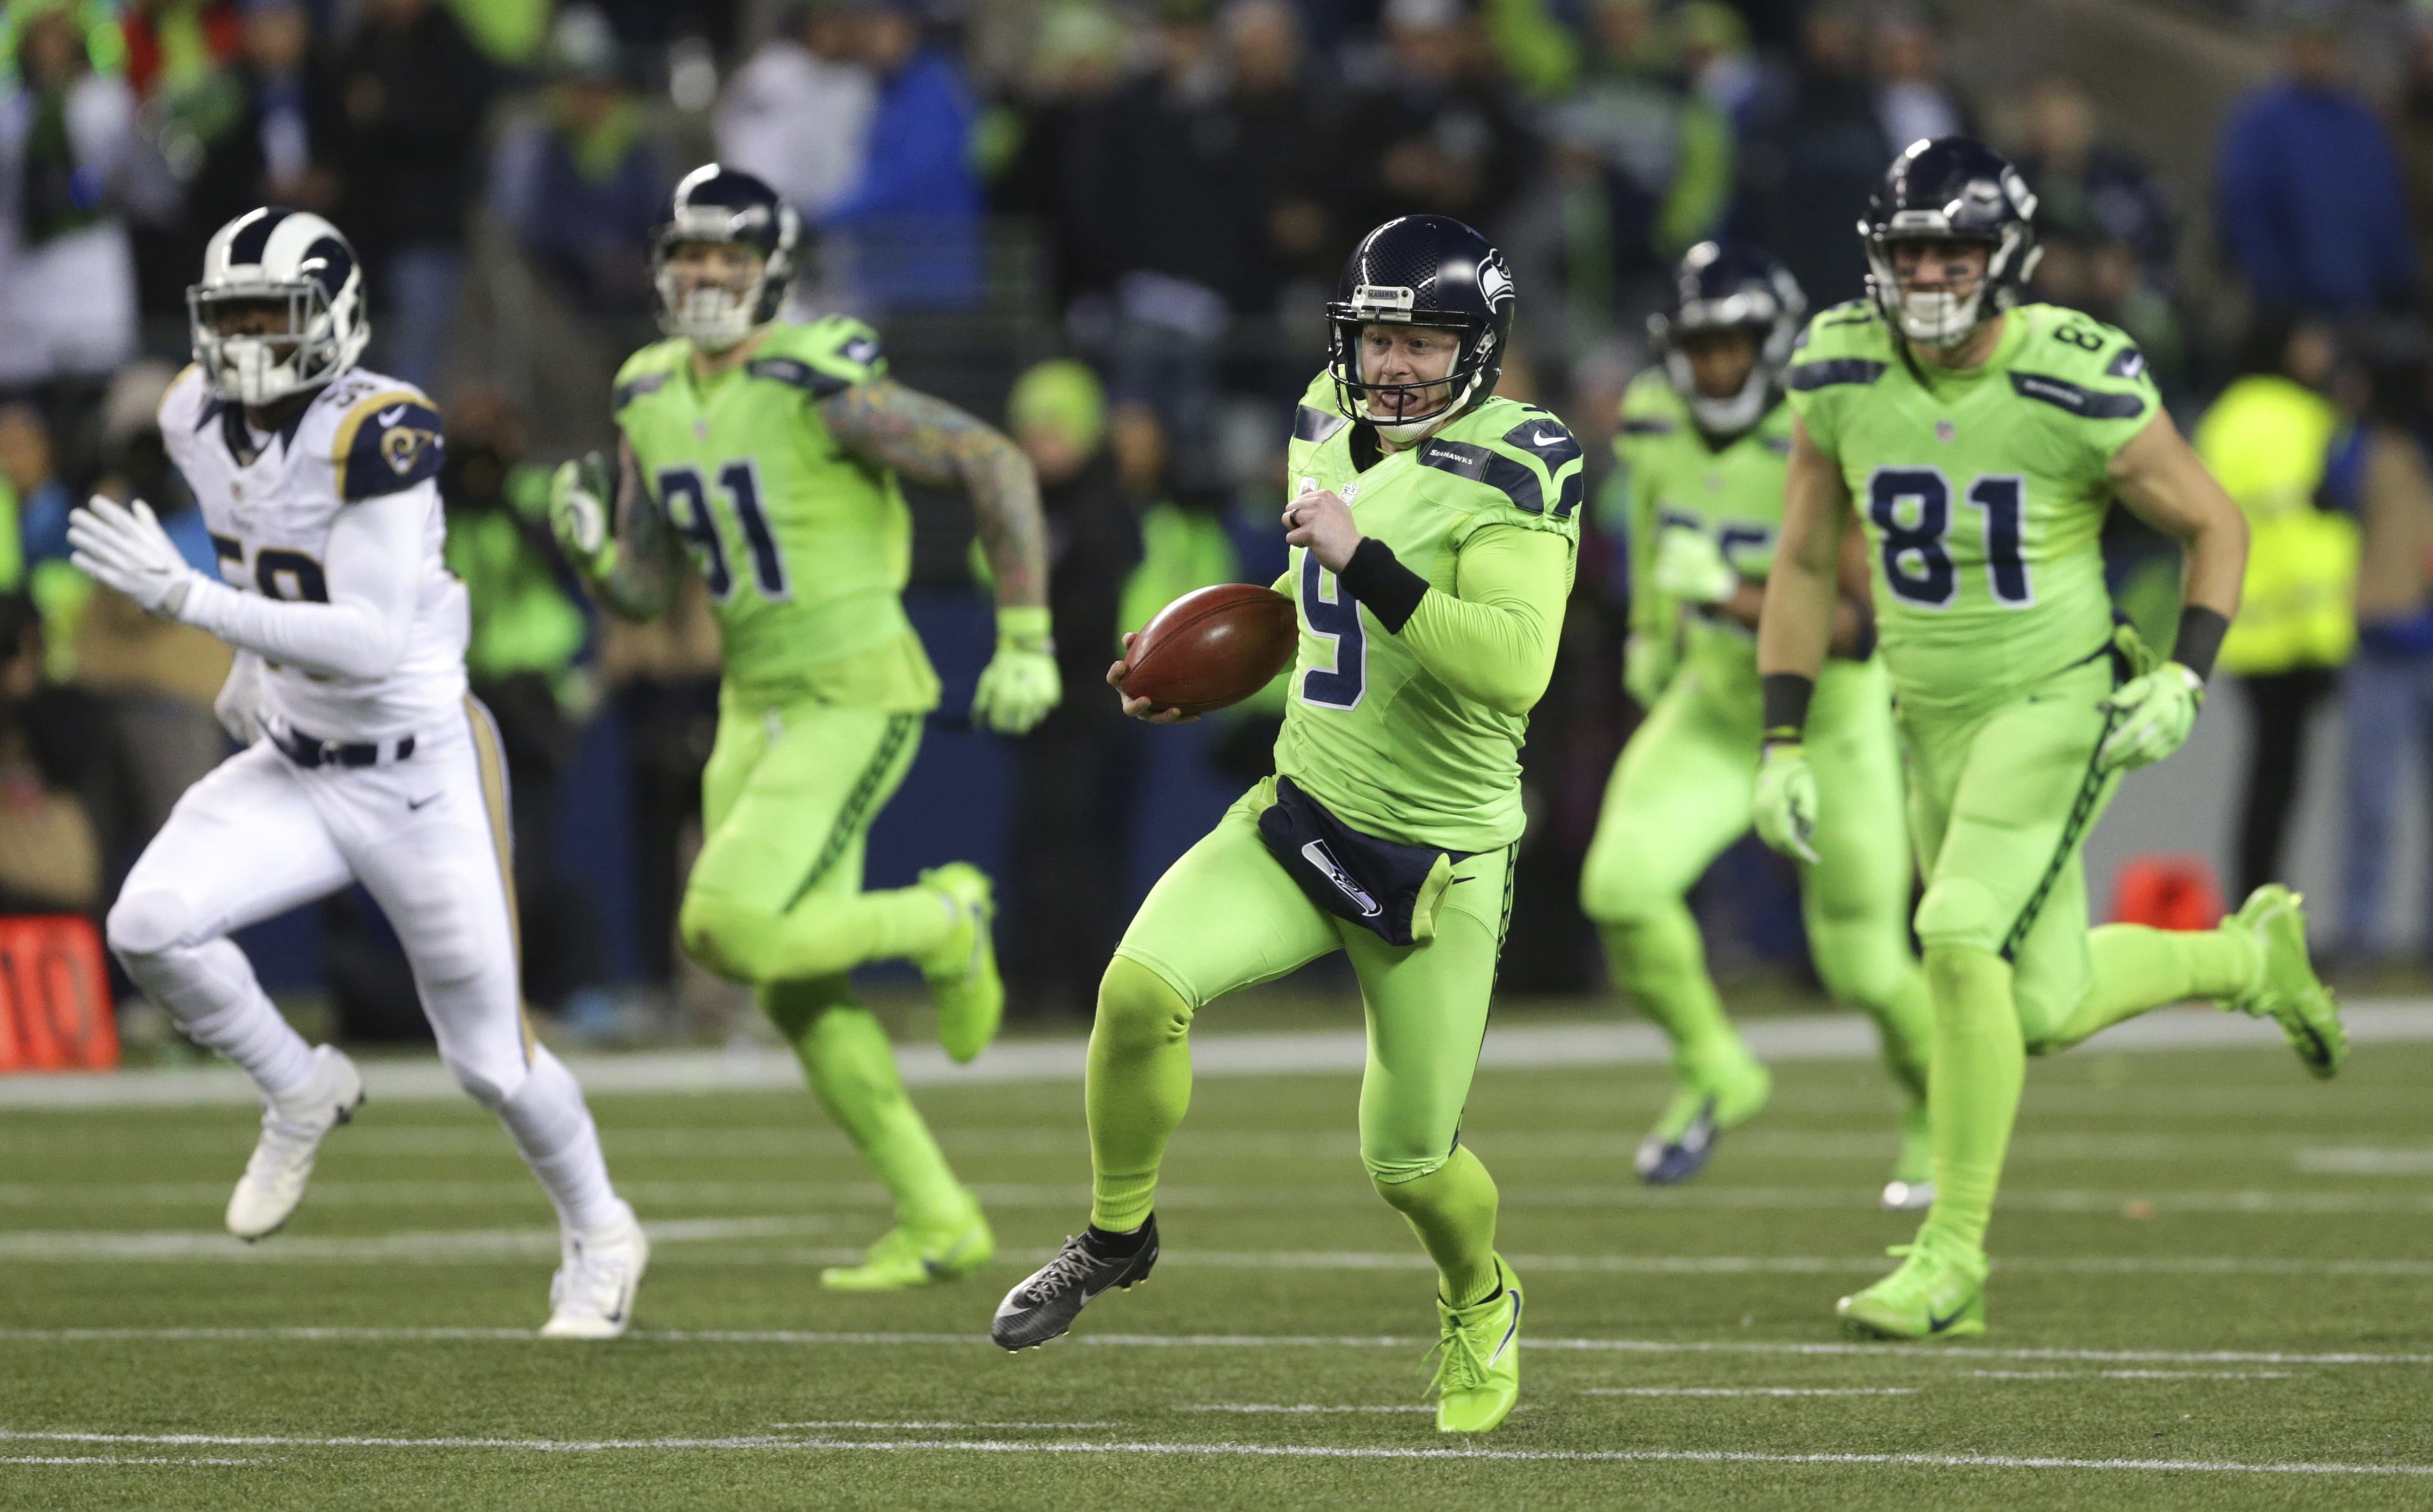 Seattle Seahawks punter Jon Ryan (9) runs the ball after a fake punt against the Los Angeles Rams in the second half of an NFL football game, Thursday, Dec. 15, 2016, in Seattle. Ryan suffered an injury on the play and left the game.